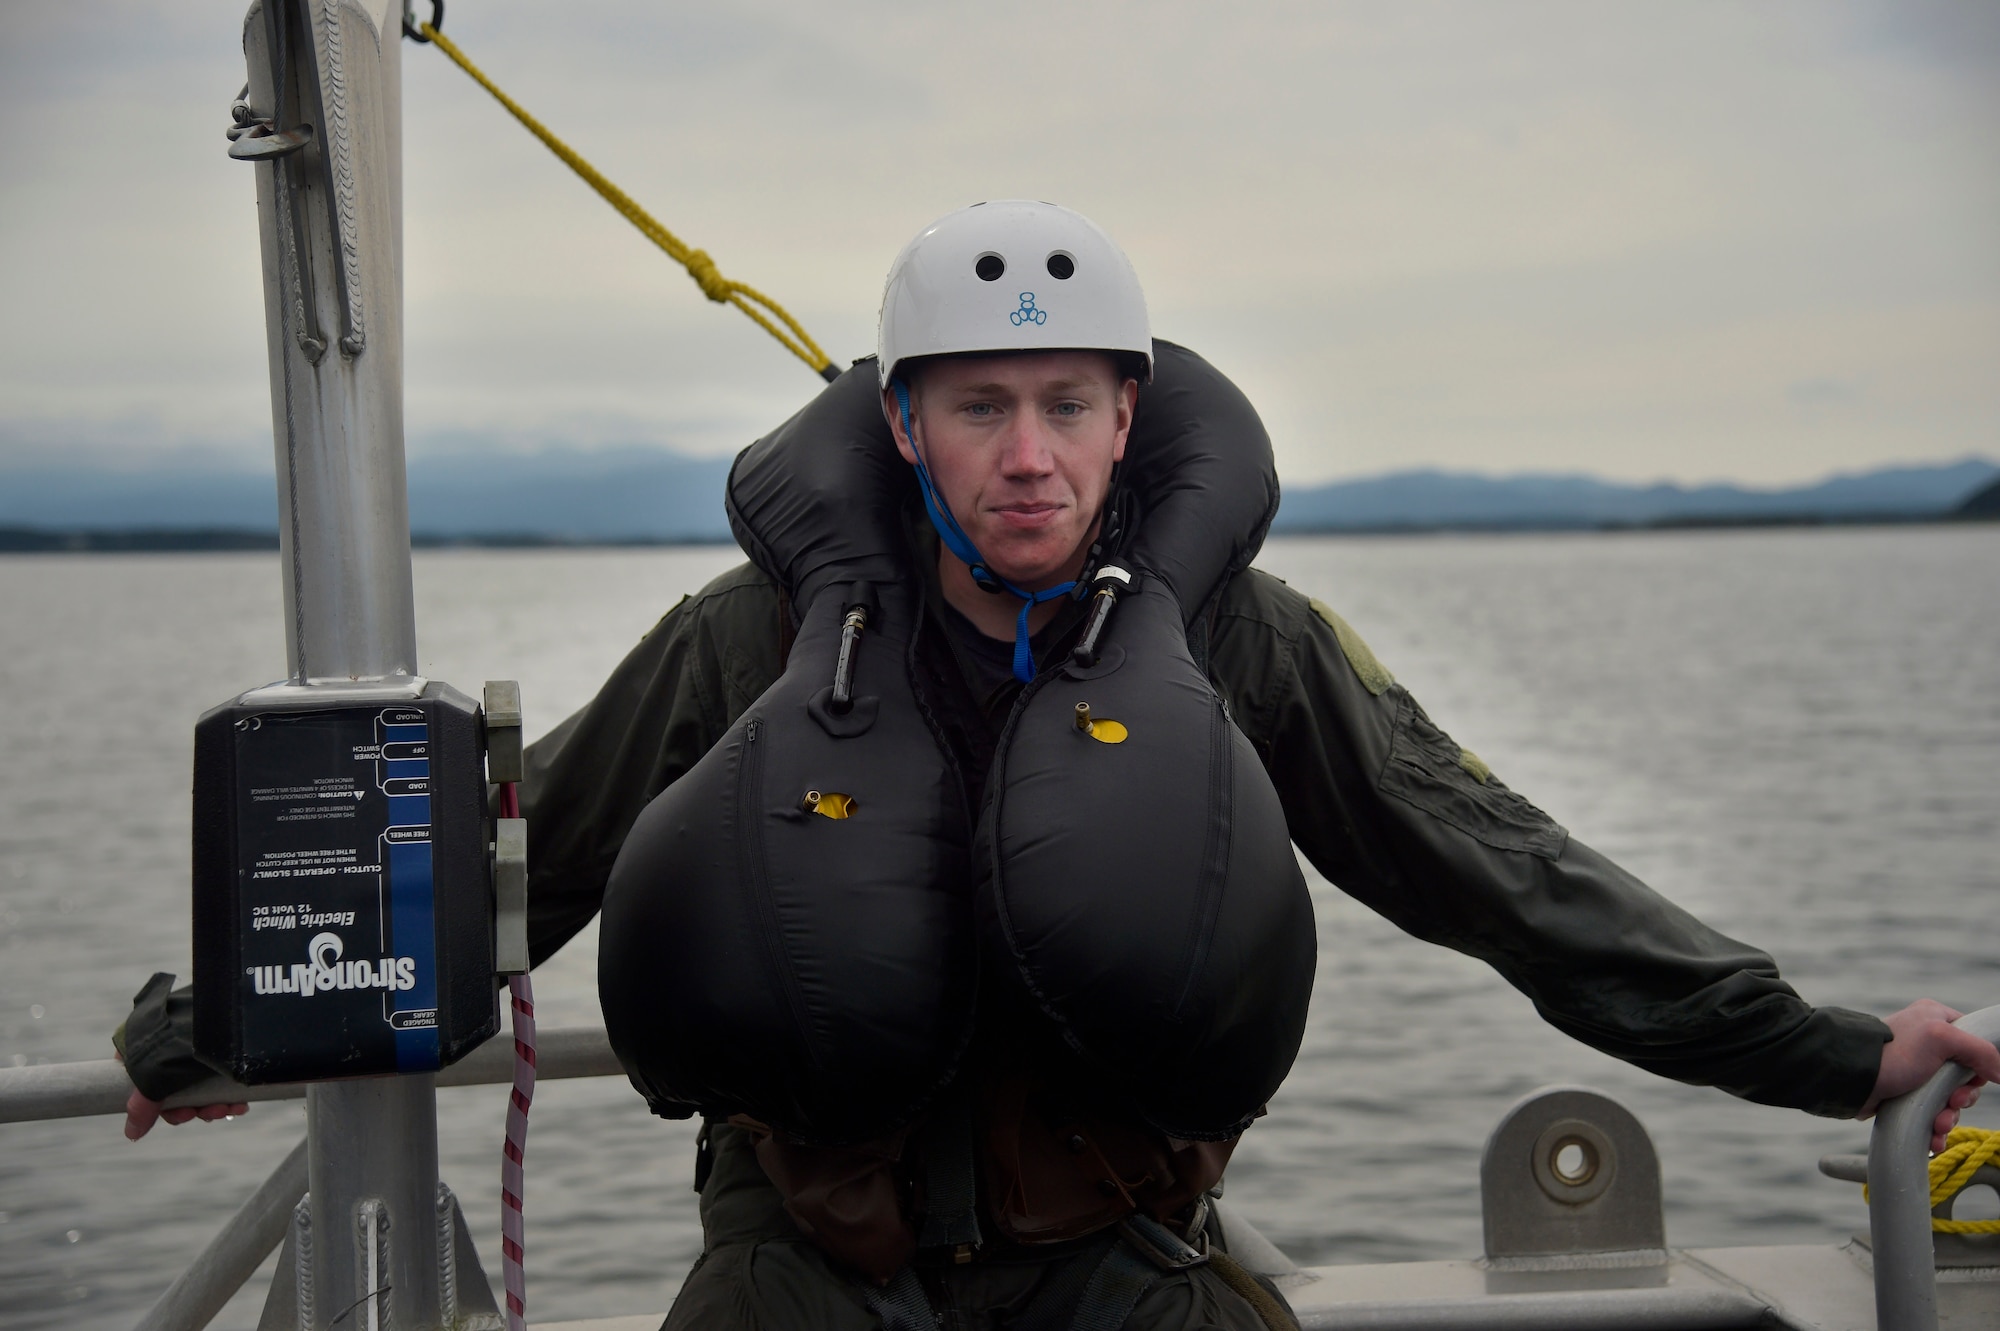 U.S. Air Force Senior Airman Kyle Gergel, a power production journeyman with the 35th Civil Engineer Squadron and a Survival, Evasion, Resistance, and Escape support volunteer, poses for a photo on Lake Ogawara at Misawa Air Base, Japan, Sept. 20, 2016. Because there are only two SERE specialists on-station, training scenarios, like the water survival refresher course, depends on volunteers to help create the most realistic and hands-on training for 35th Fighter Wing pilots involved. Volunteers must know how to swim and be in good military standings. (U.S. Air Force photo by Senior Airman Deana Heitzman)